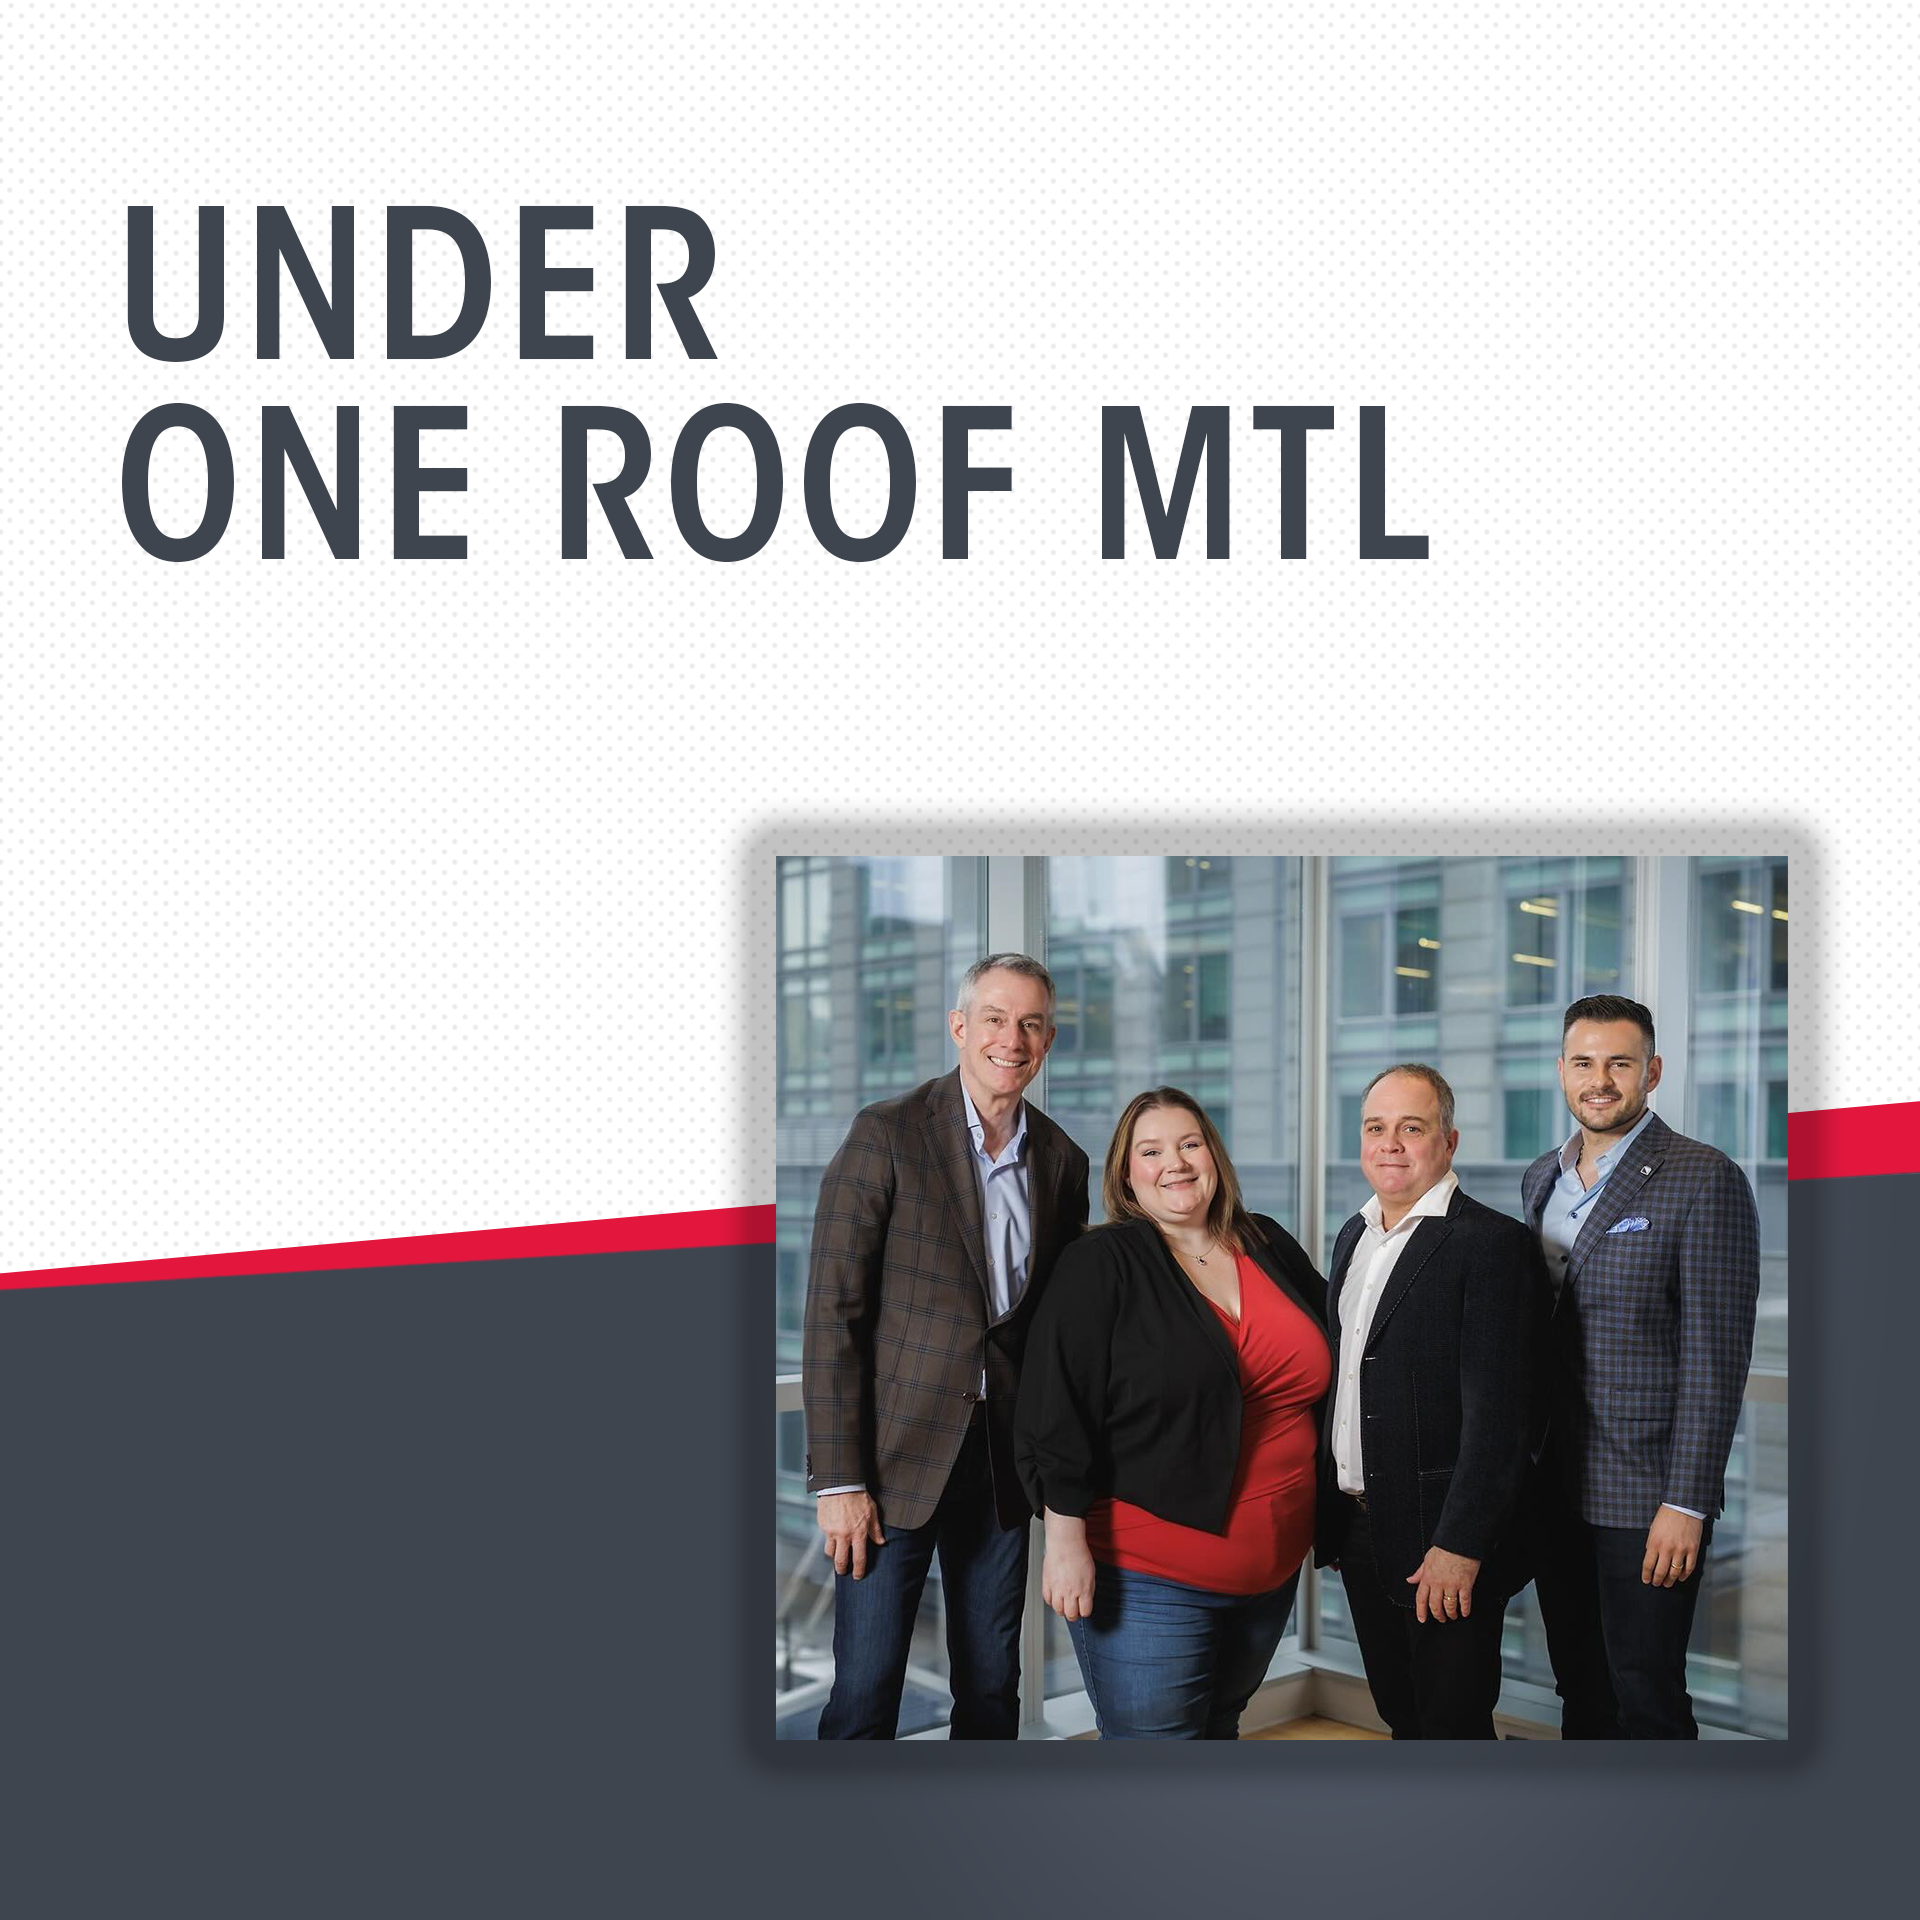 Under One Roof MTL: The dos and don'ts of property photos